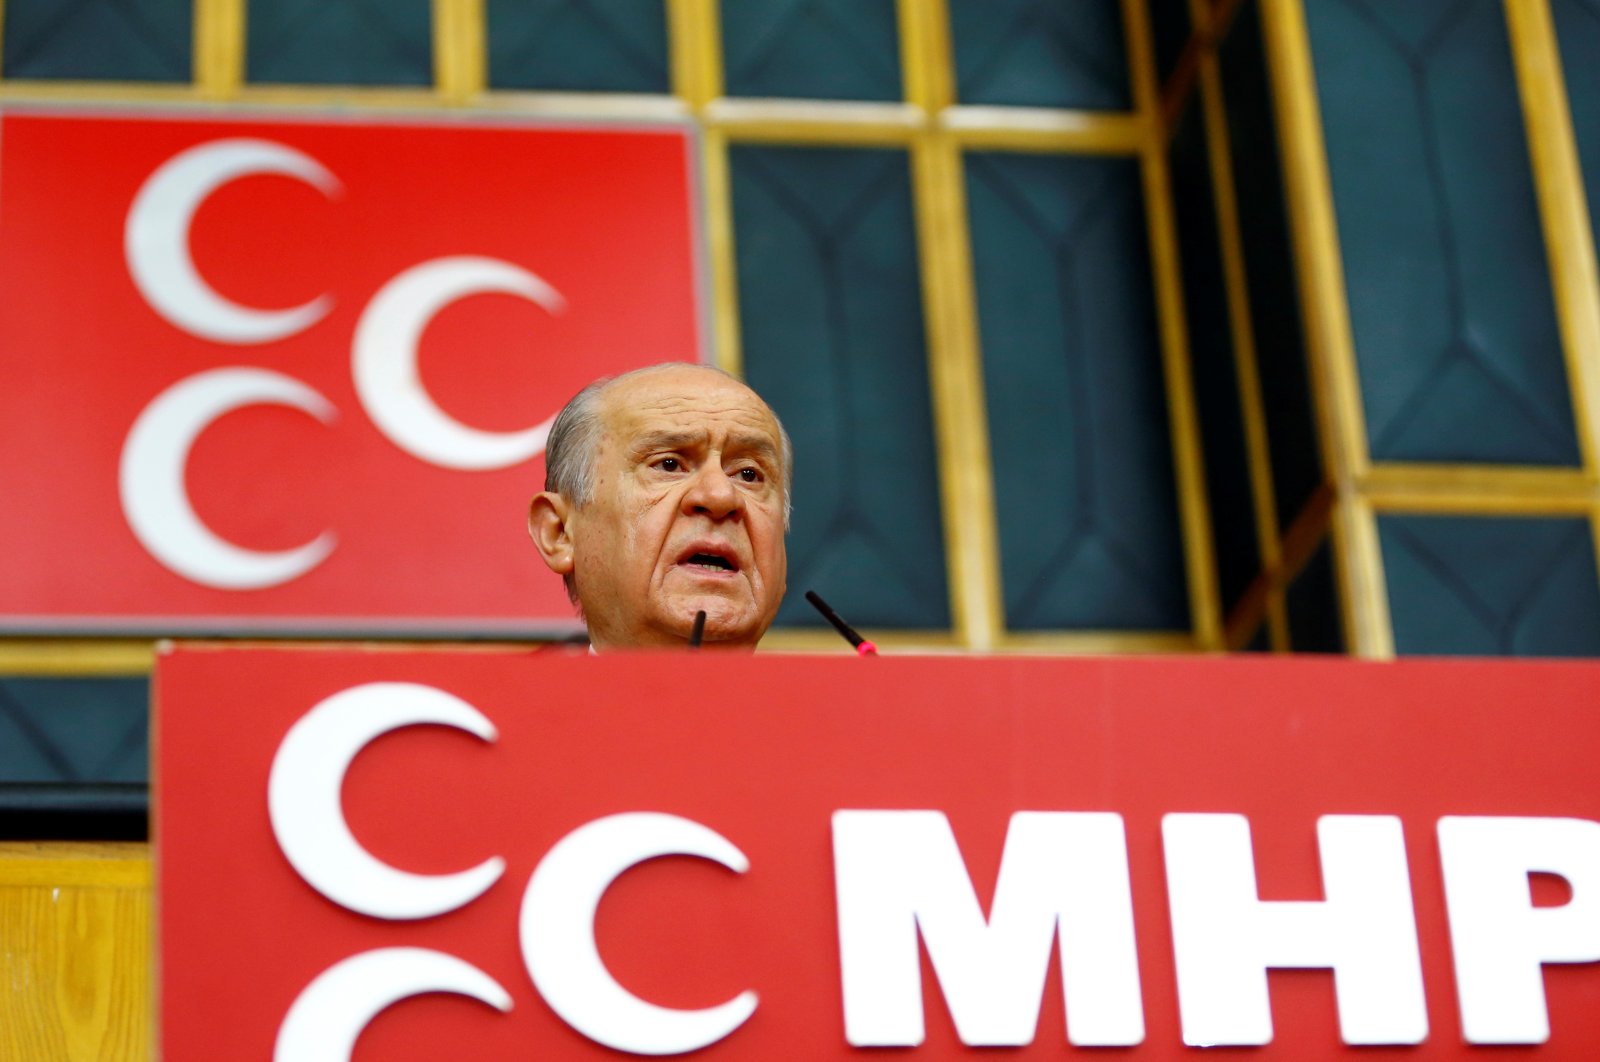 Nationalist Movement Party (MHP) Chairman Devlet Bahçeli addresses his party lawmakers during a meeting at the Turkish Parliament in Ankara, June 14, 2016. (Reuters File Photo)